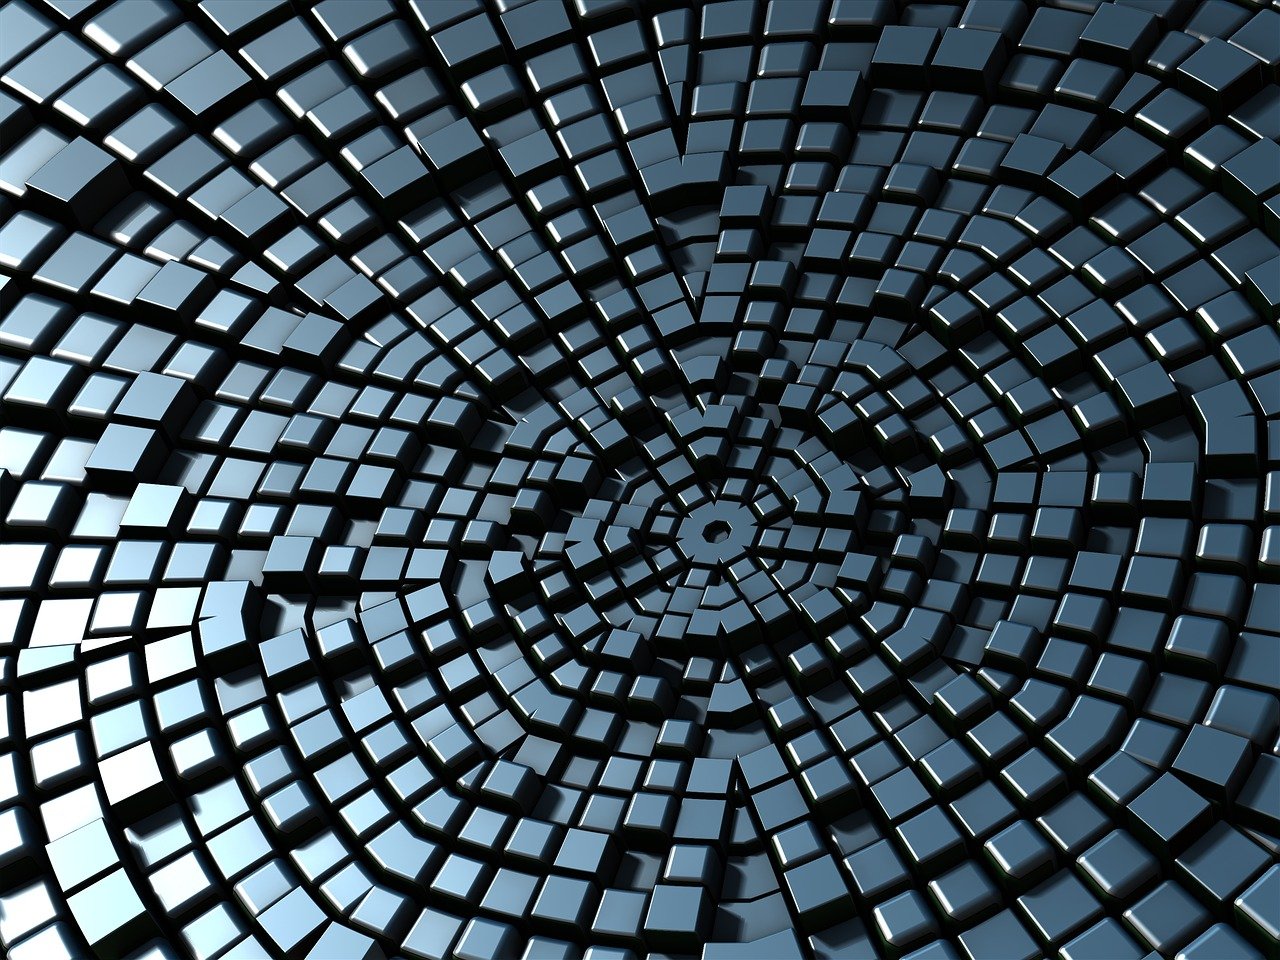 a black and white picture of a black and white picture of a black and white picture of a black and white picture of a black and white, digital art, by Jon Coffelt, shutterstock, abstract illusionism, broken tiles, wormholes, abstract design. parallax. blue, metallic polished surfaces